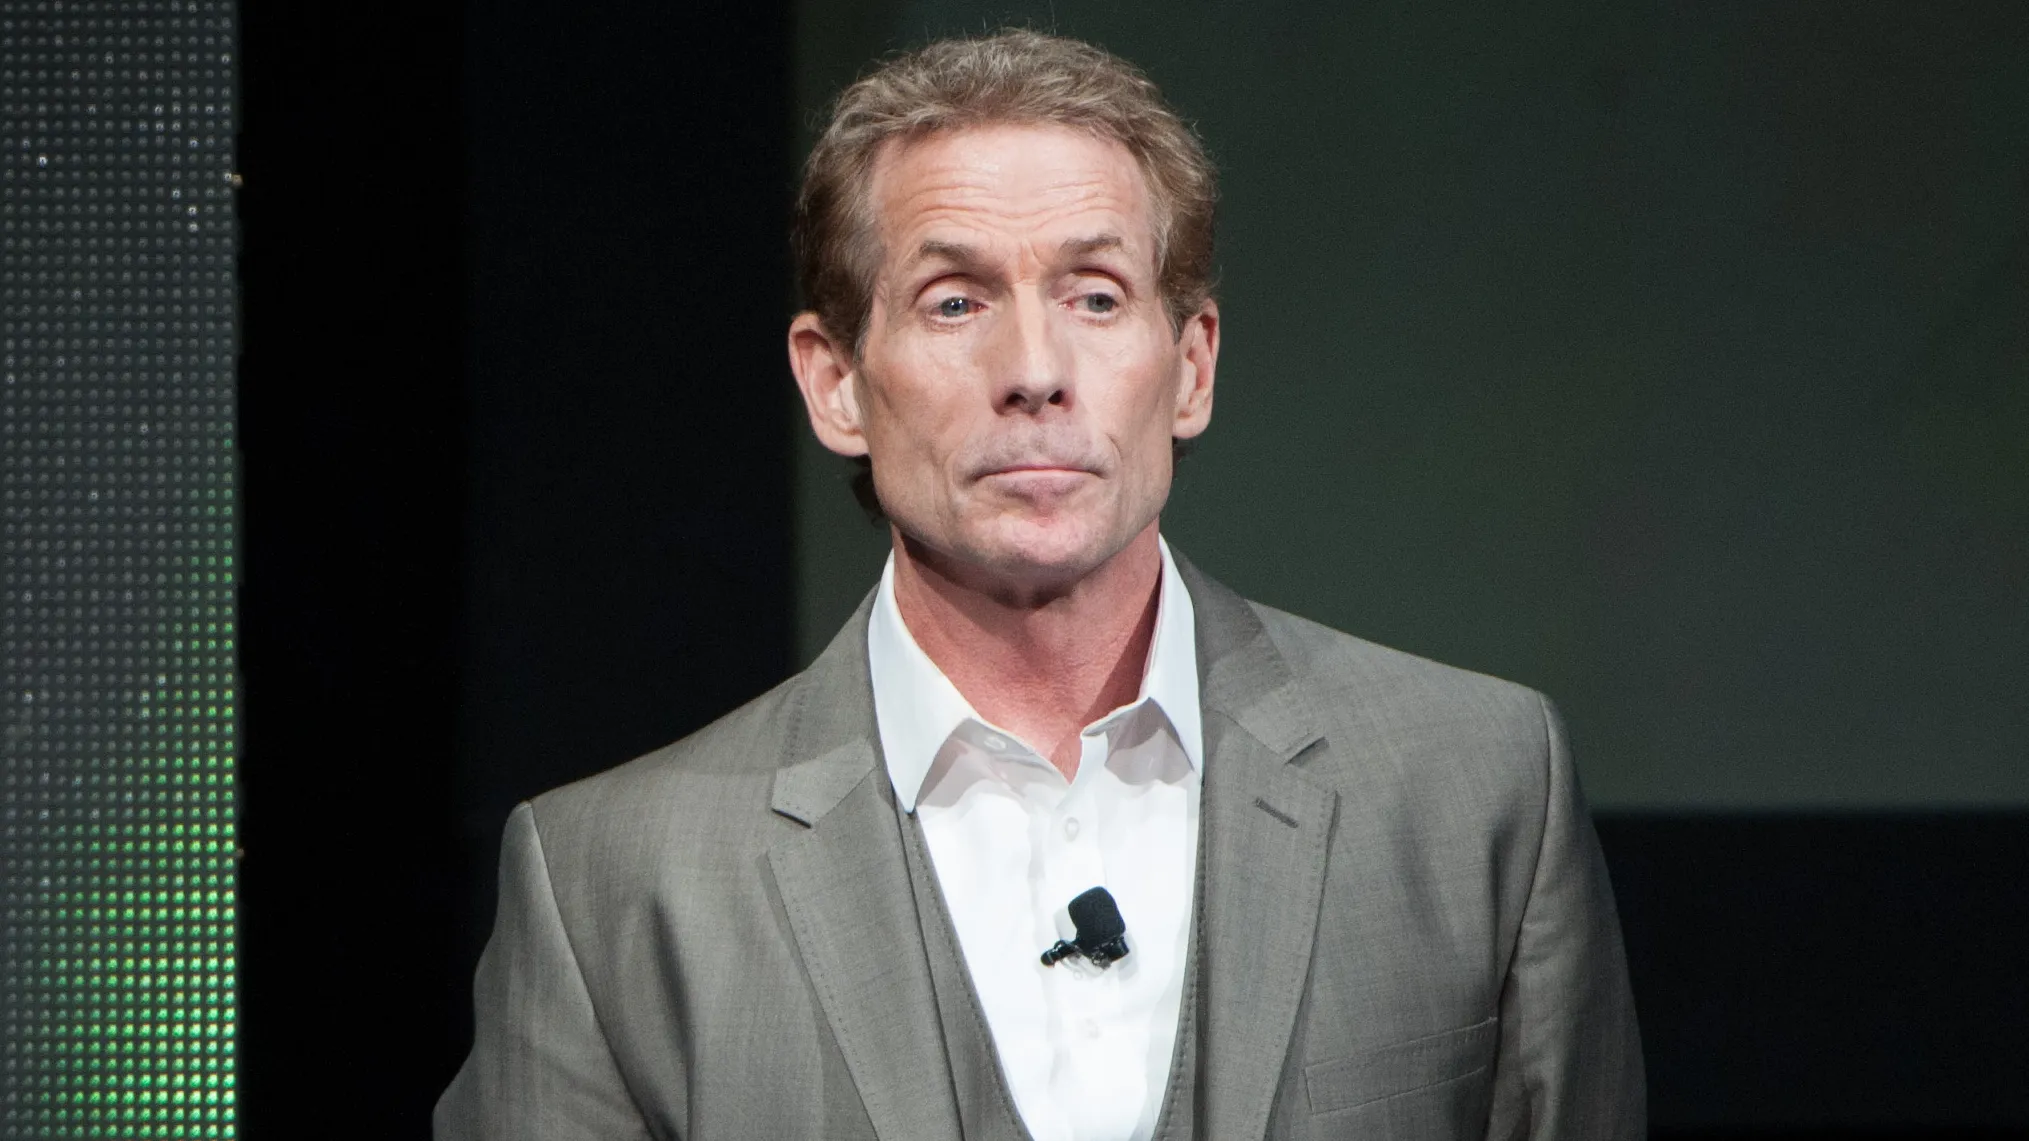 Skip Bayless shocking revelation about Lil Wayne which strengthens their bond